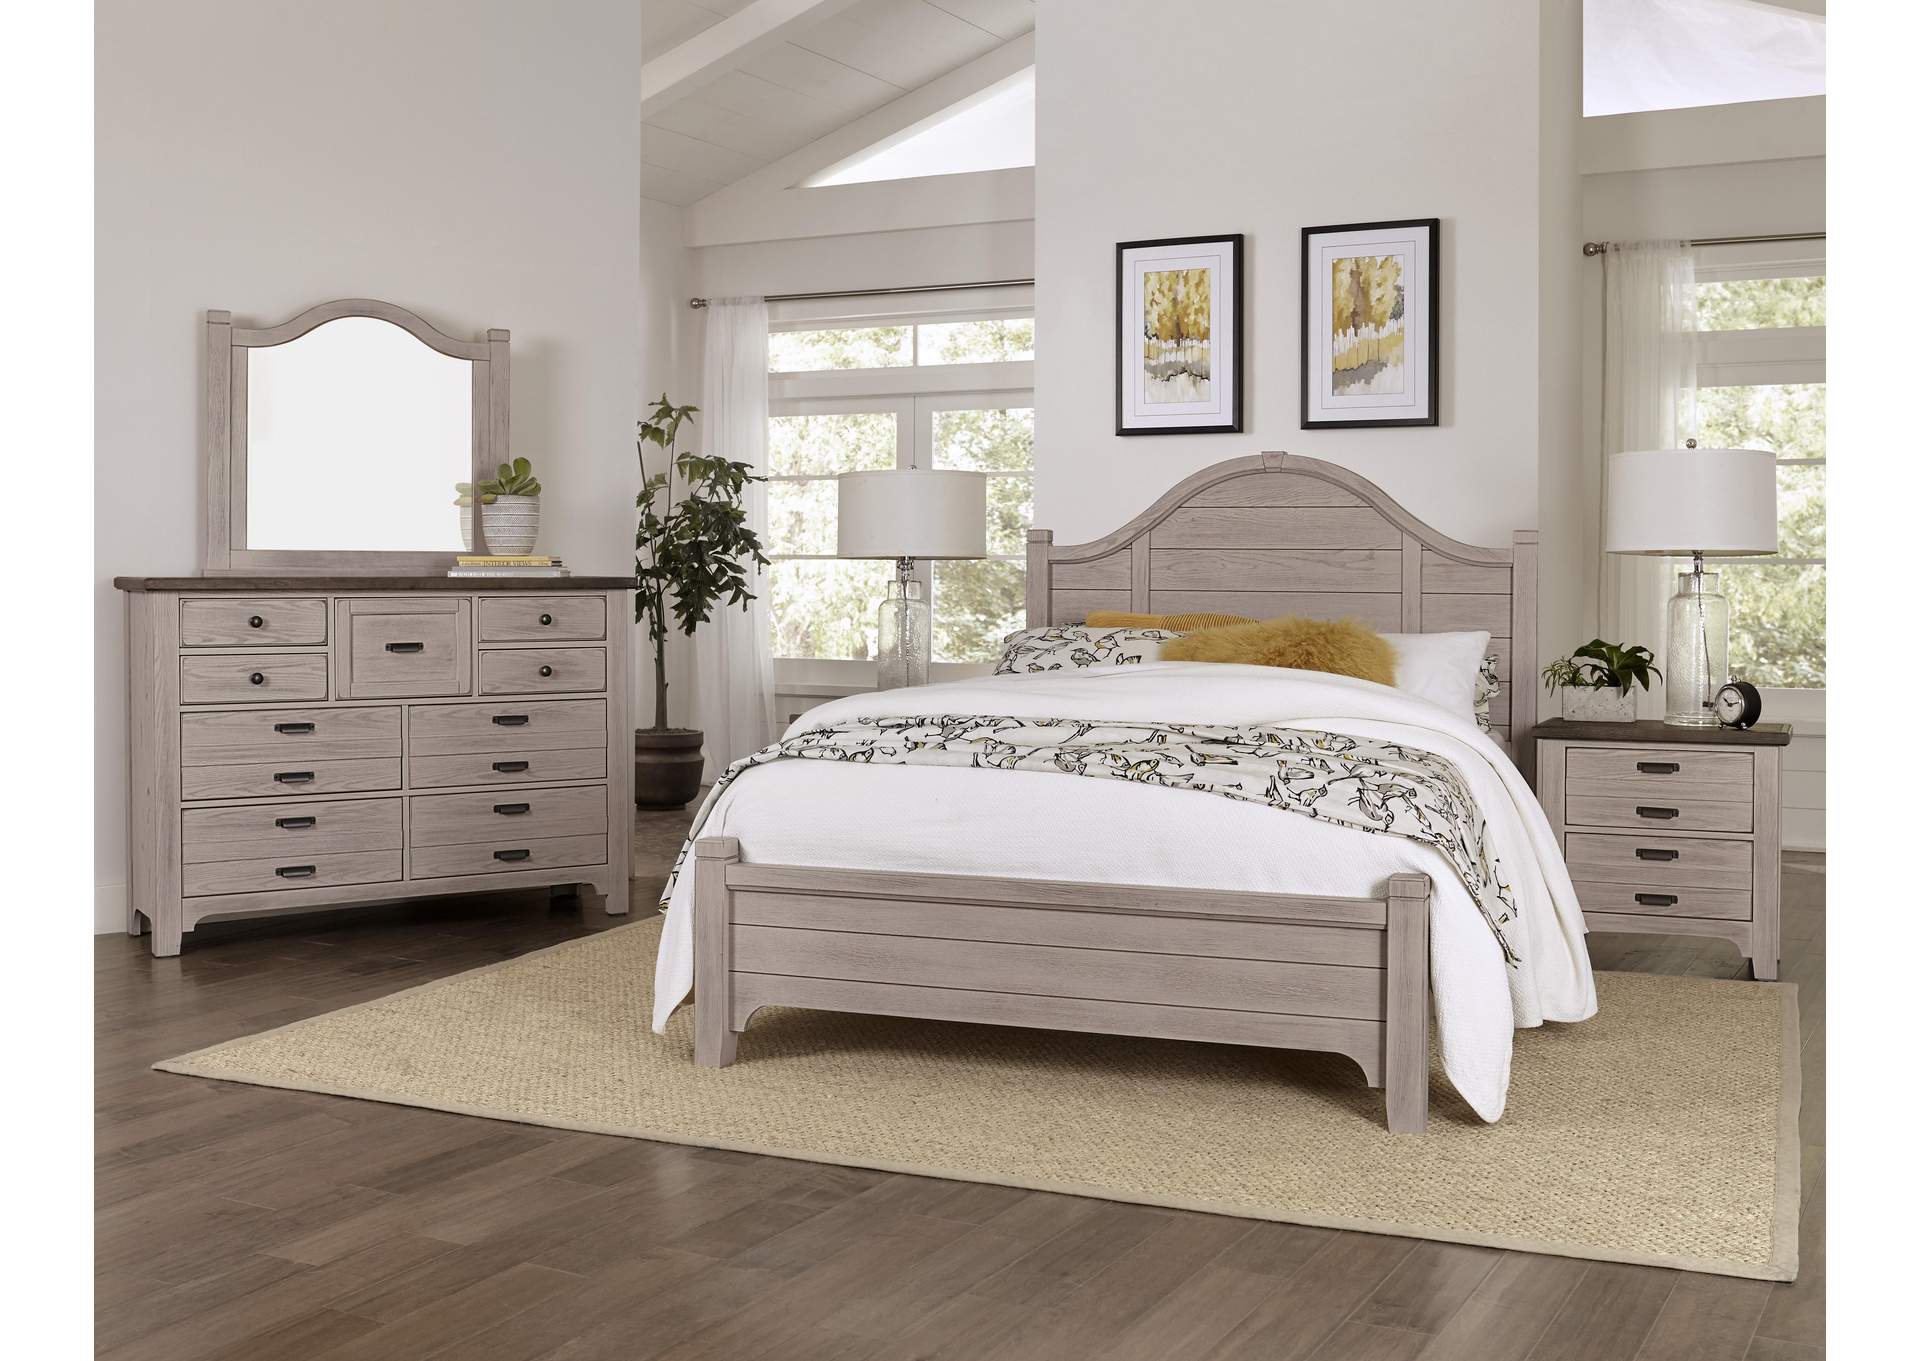 Bungalow-Dover Grey Two Tone King Arched Bed,Vaughan-Bassett